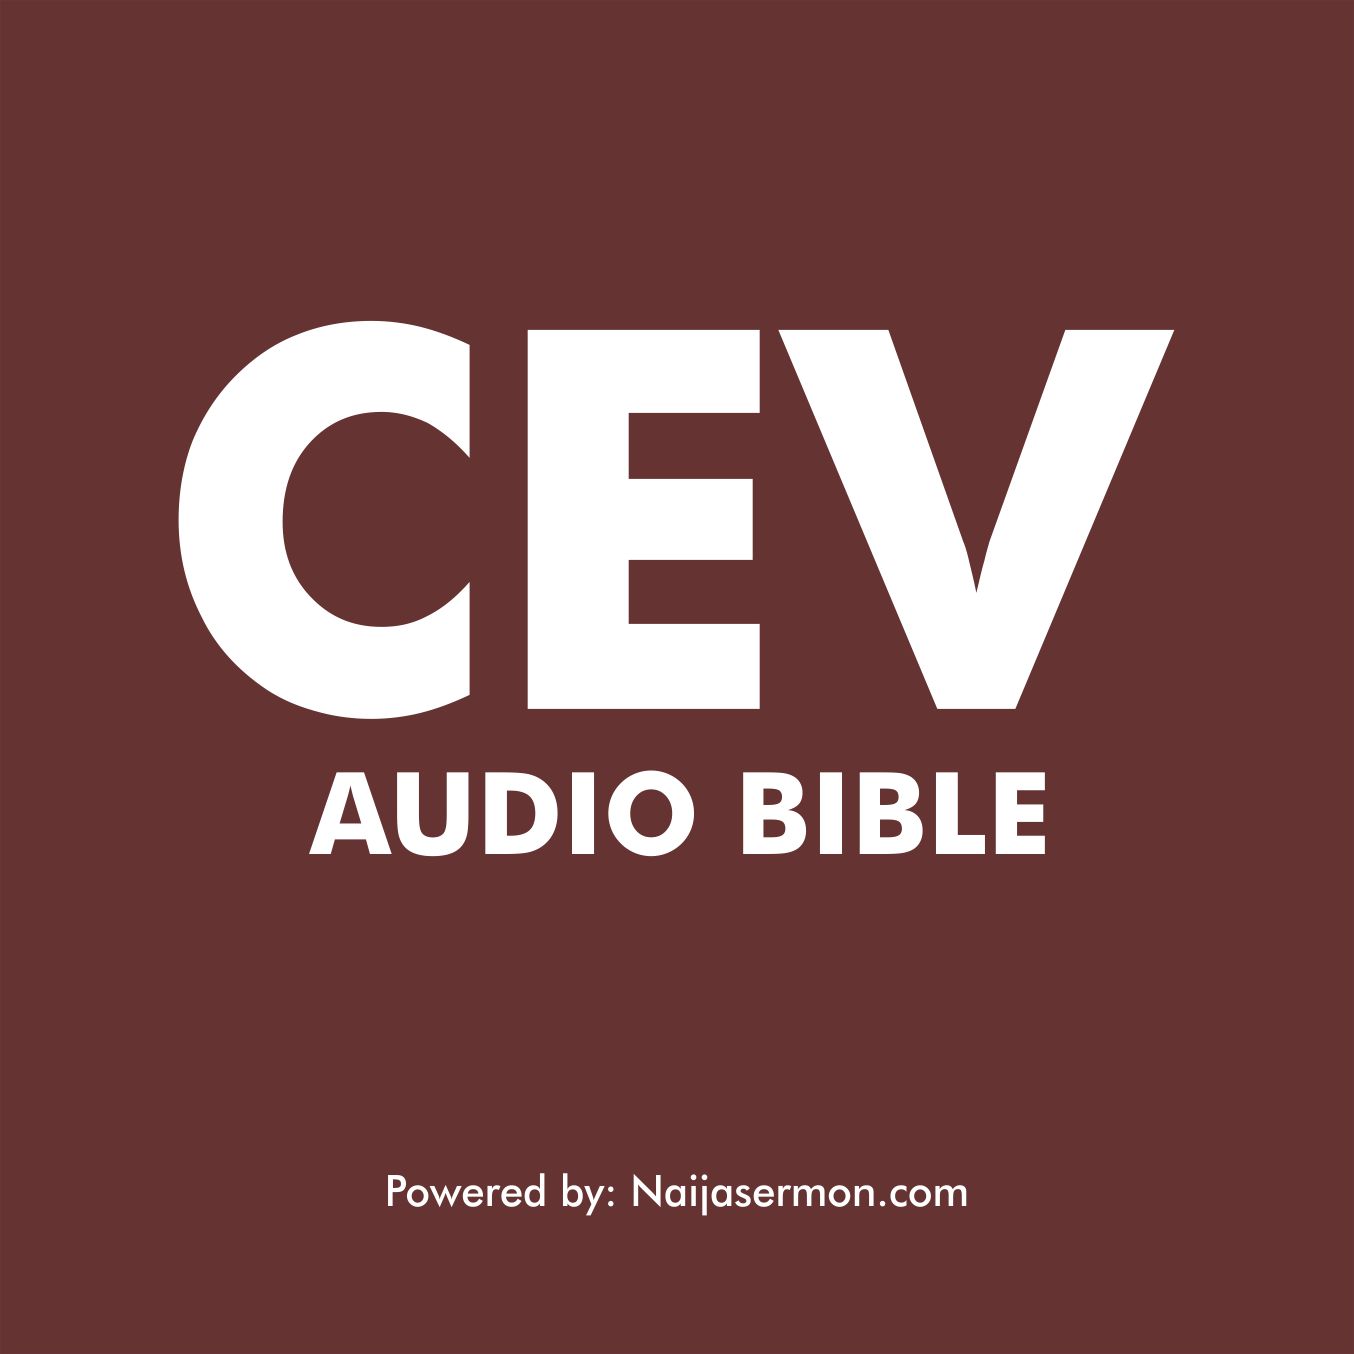 [Free] Download Contemporary English Version (CEV) Audio Bible MP3 - Dramatized 17